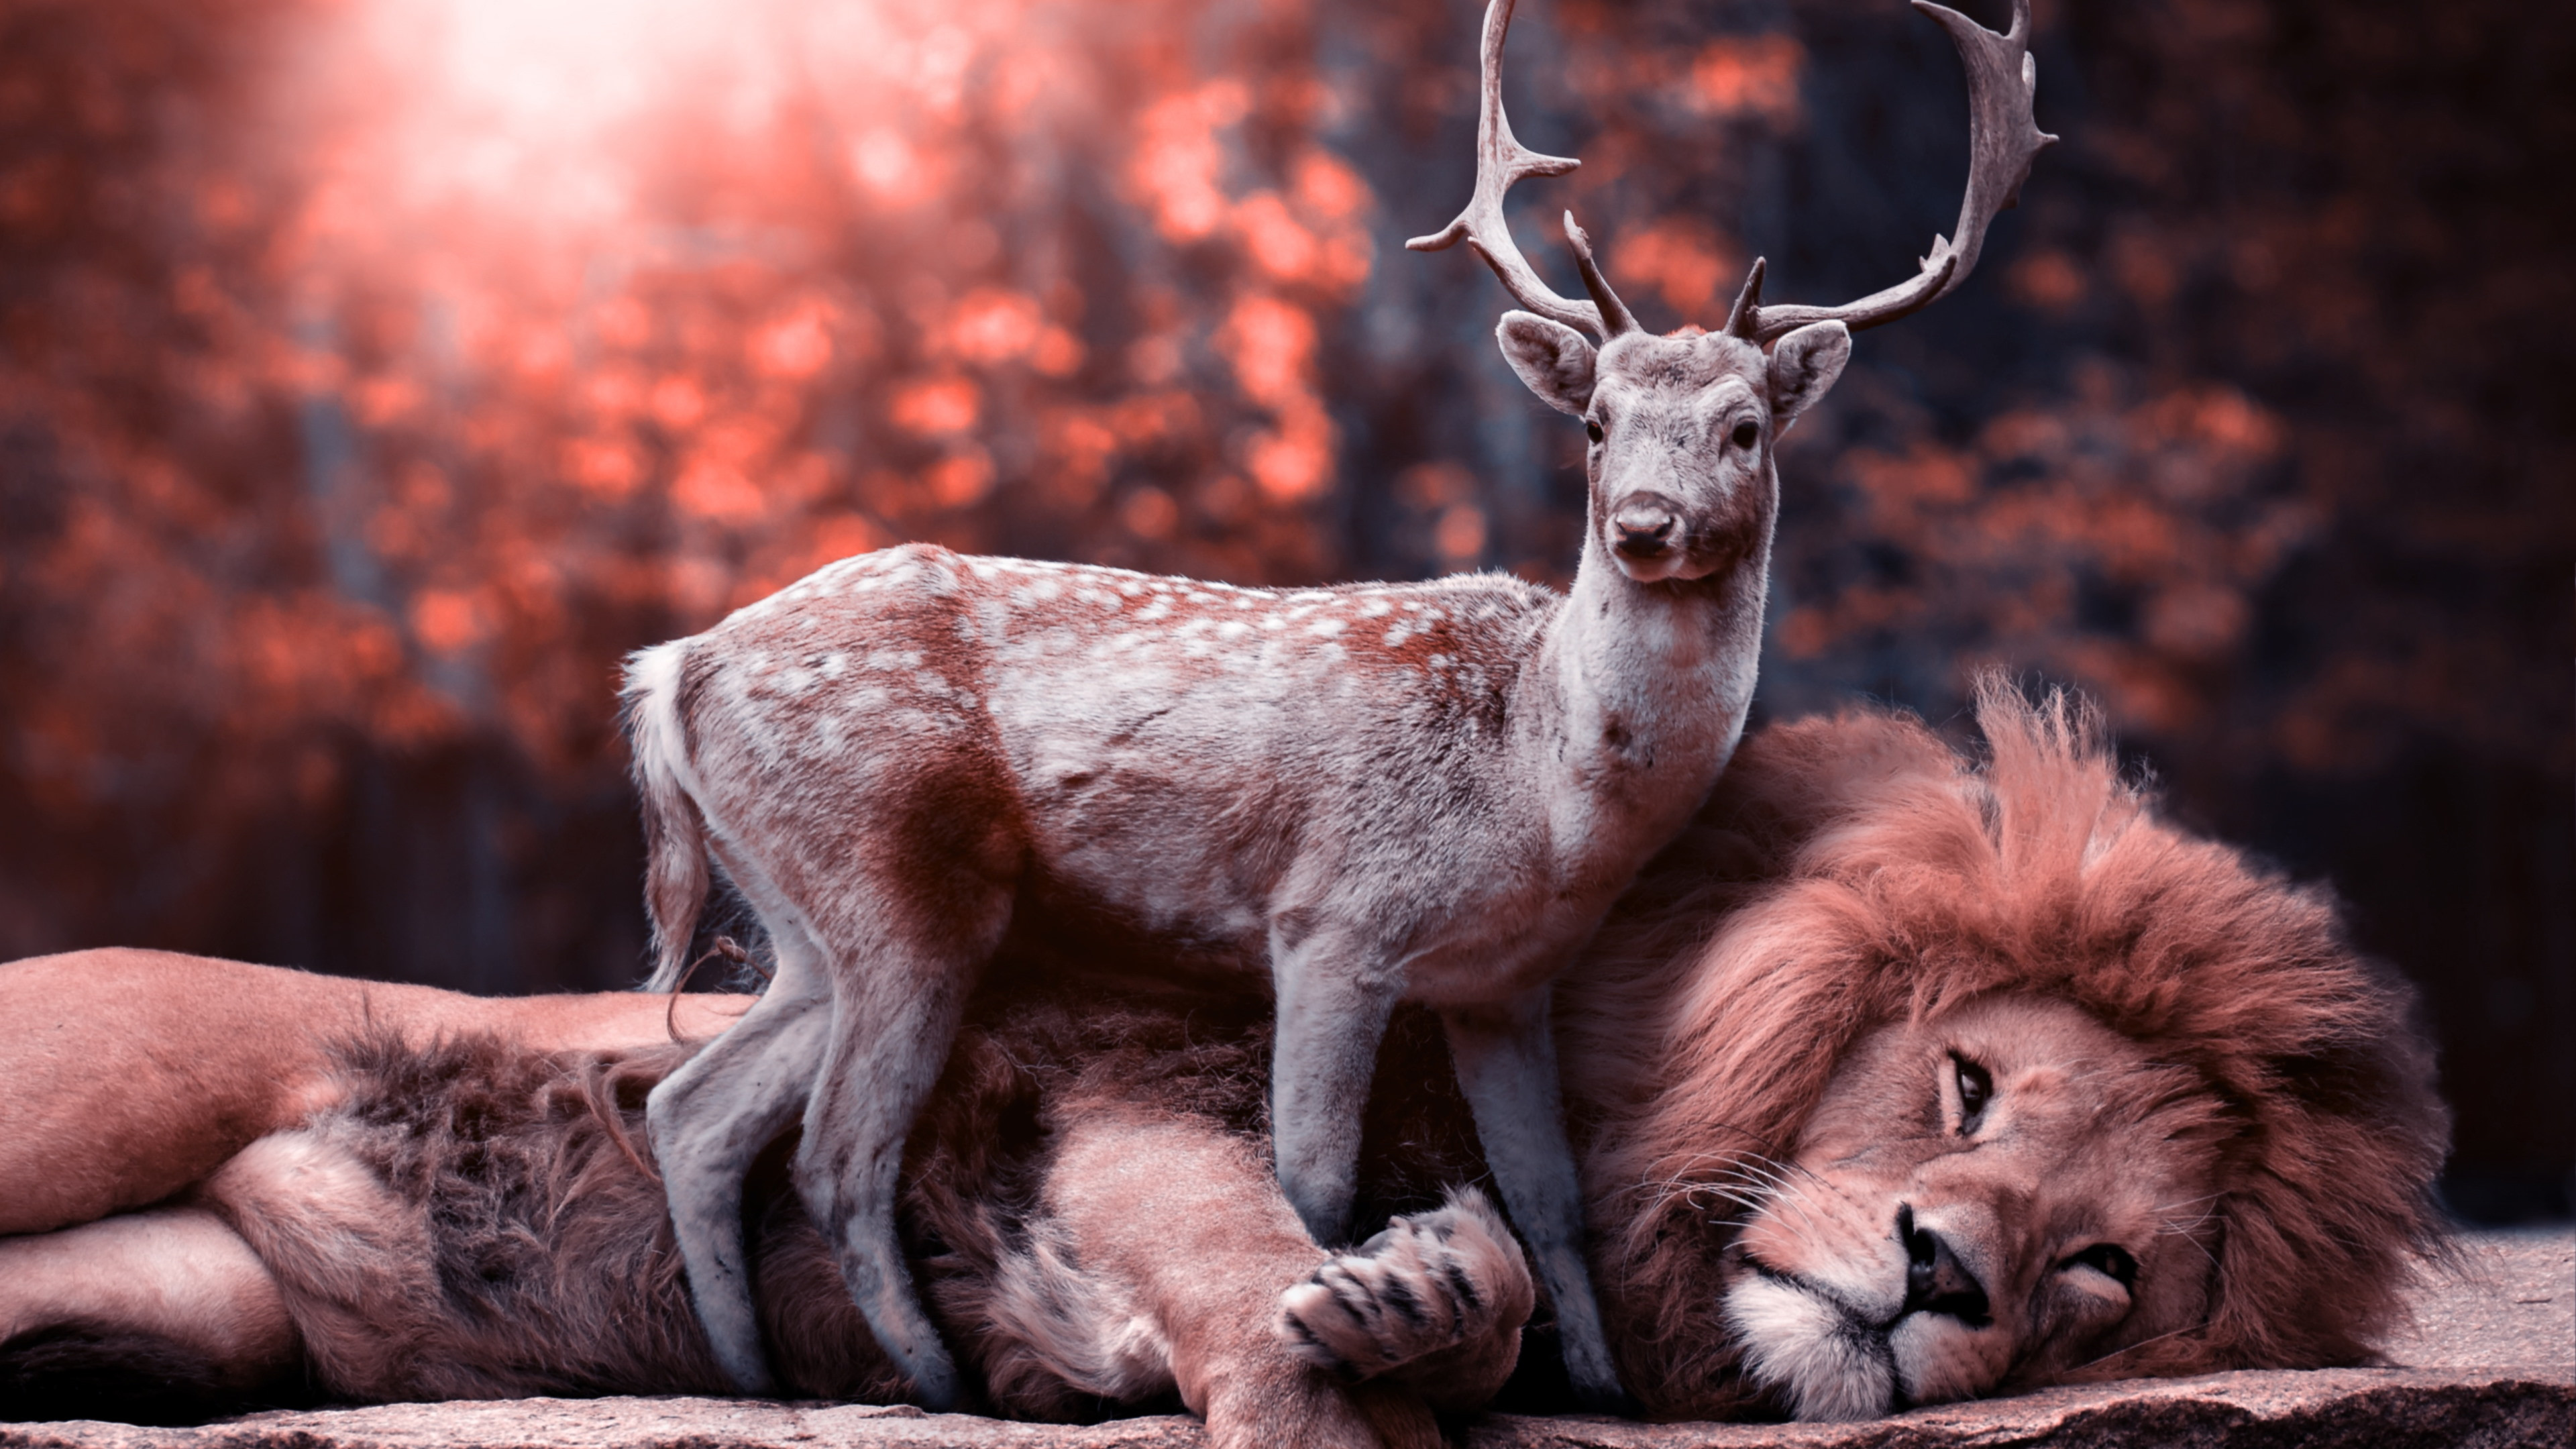 The lion and the deer wallpaper 3840x2160